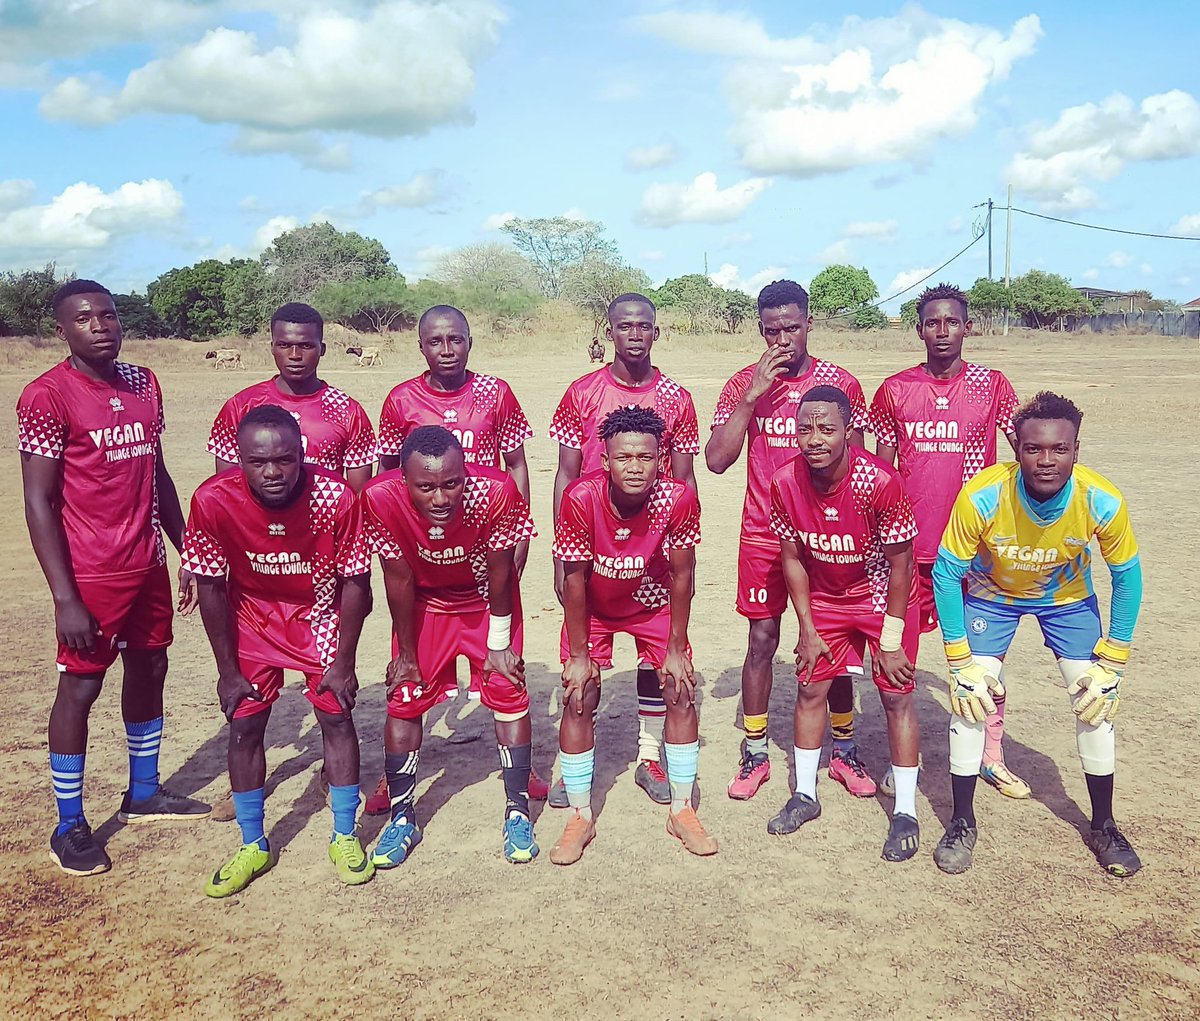 Our Vegan Team Nyundo FC sponsored by #GiriamaVillageLounge won 3-0 against Garrison FC this week. Garrison FC is one of The Kenyan Military Defence Forces football team. We played very well and could have even scored 5-6 goals. Well done to everyone. We'll played lads.